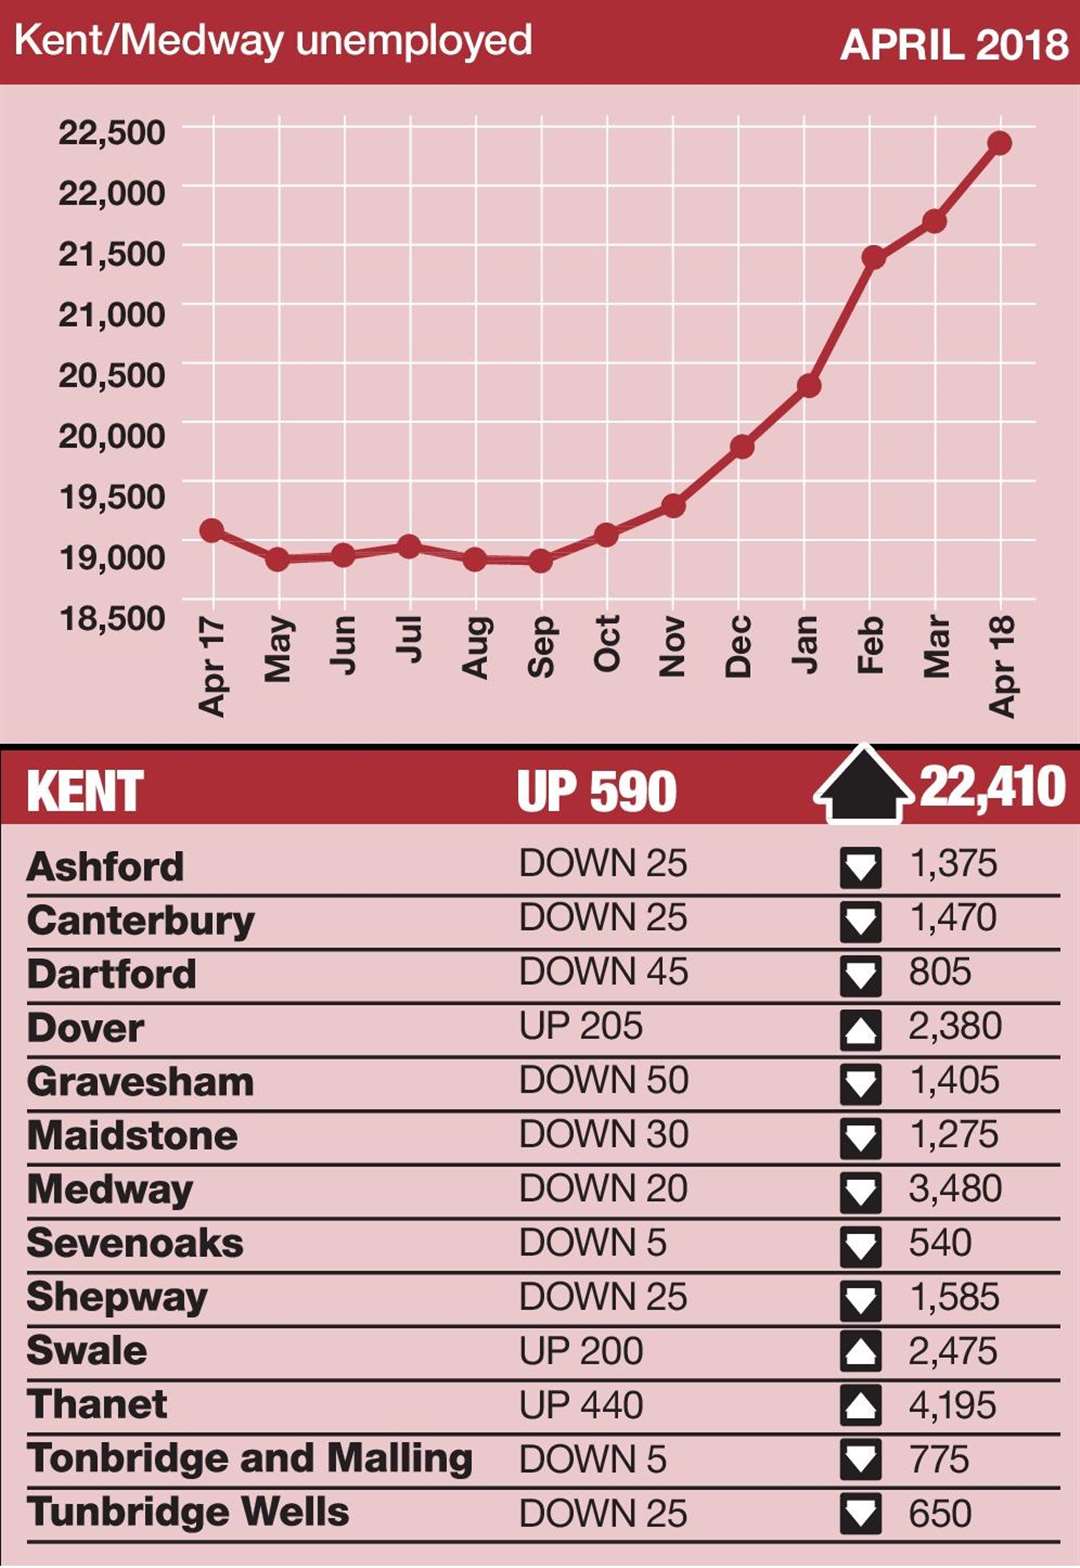 The number of people on unemployment benefits in Kent has risen for seven consecutive months